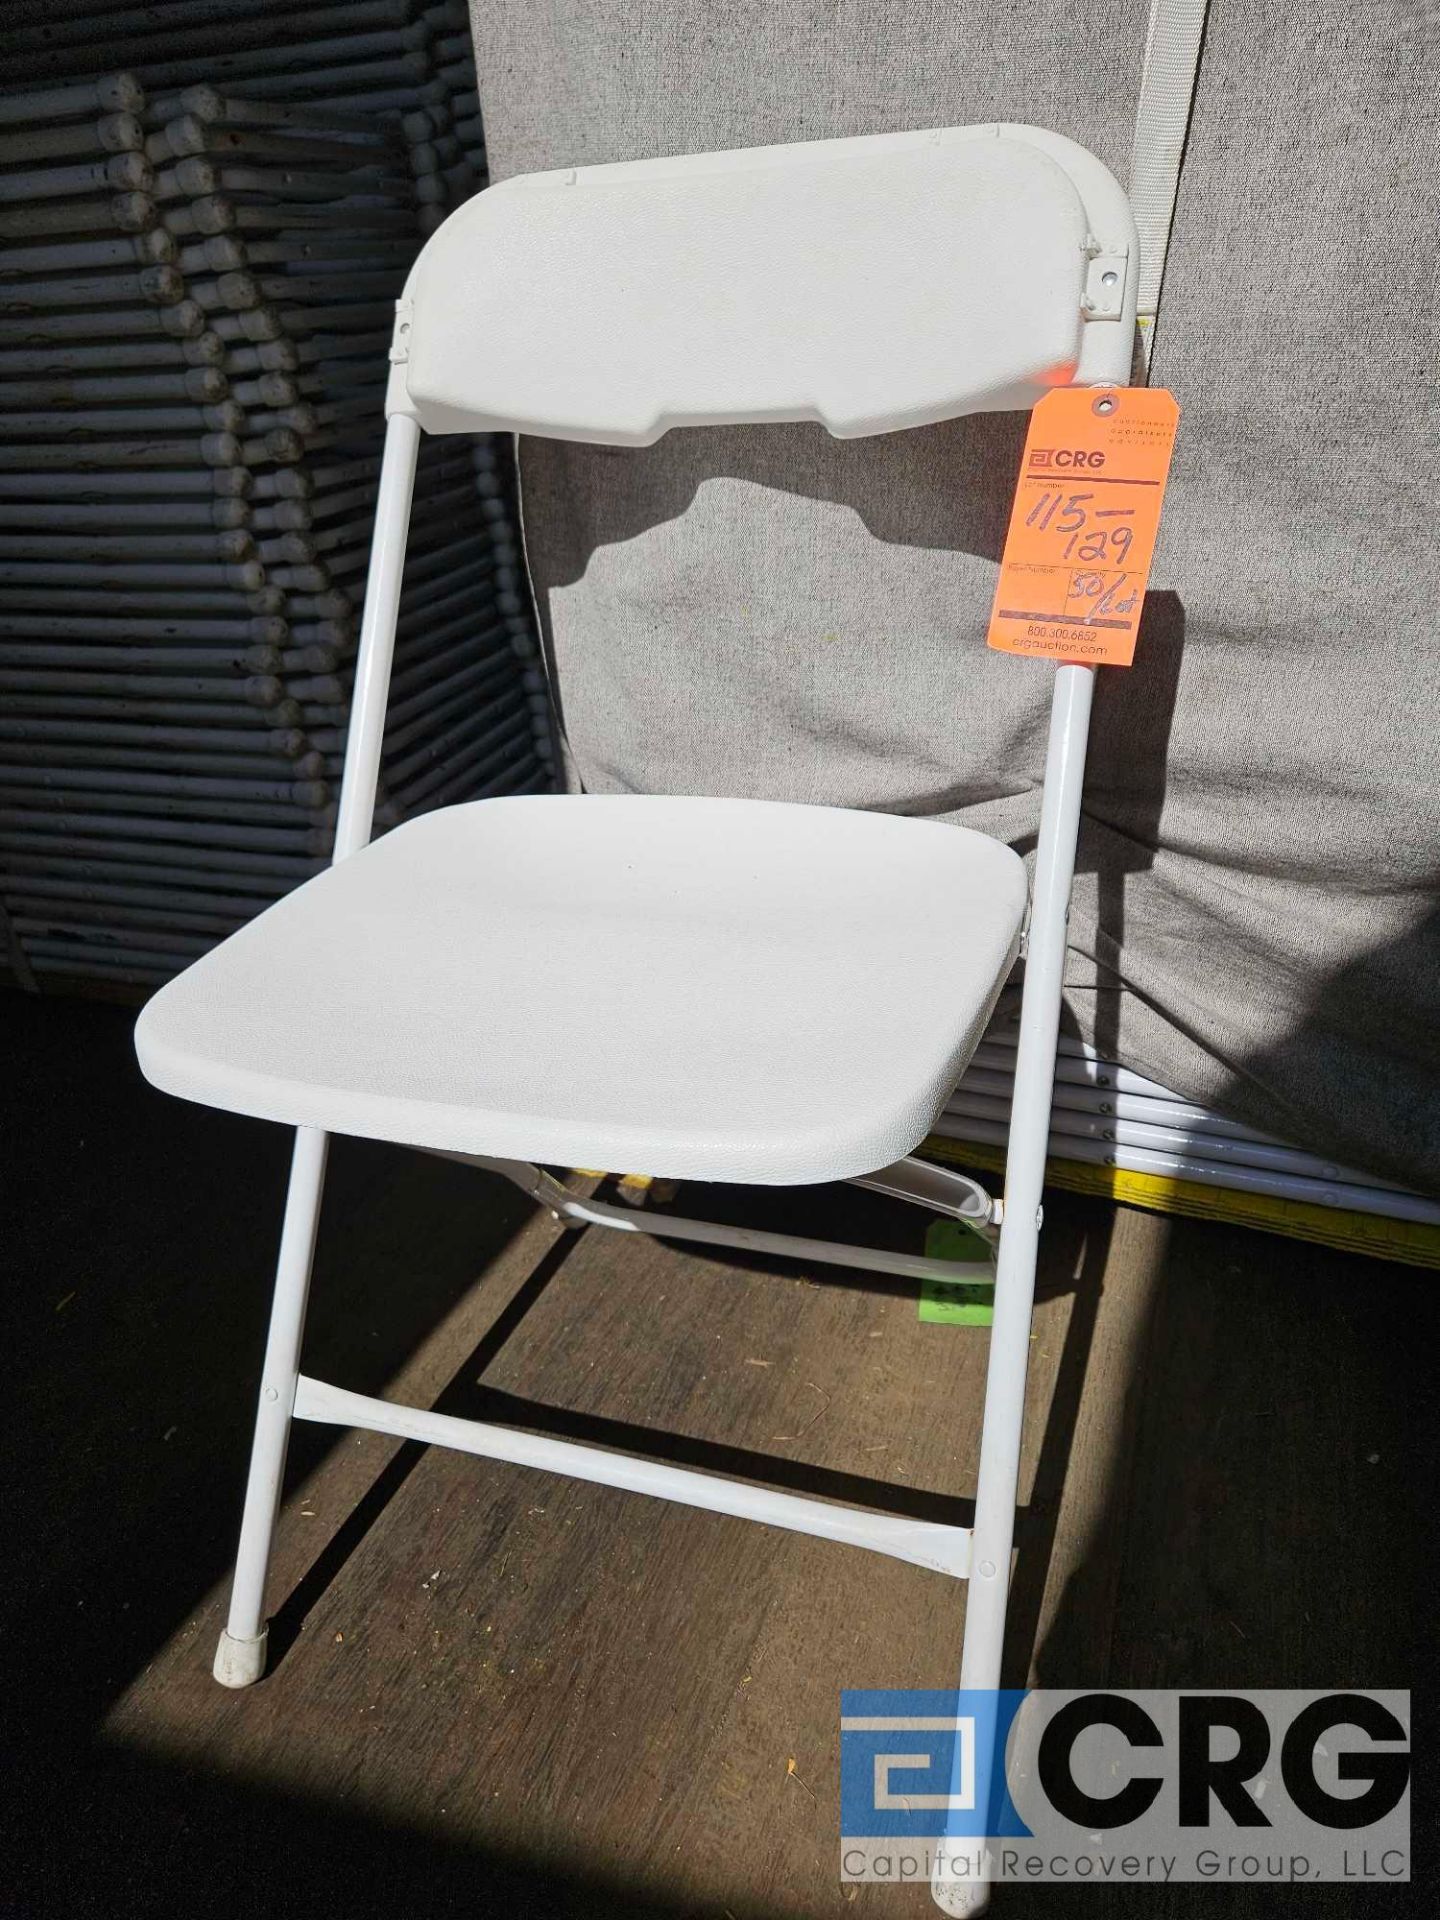 Poly Folding chairs